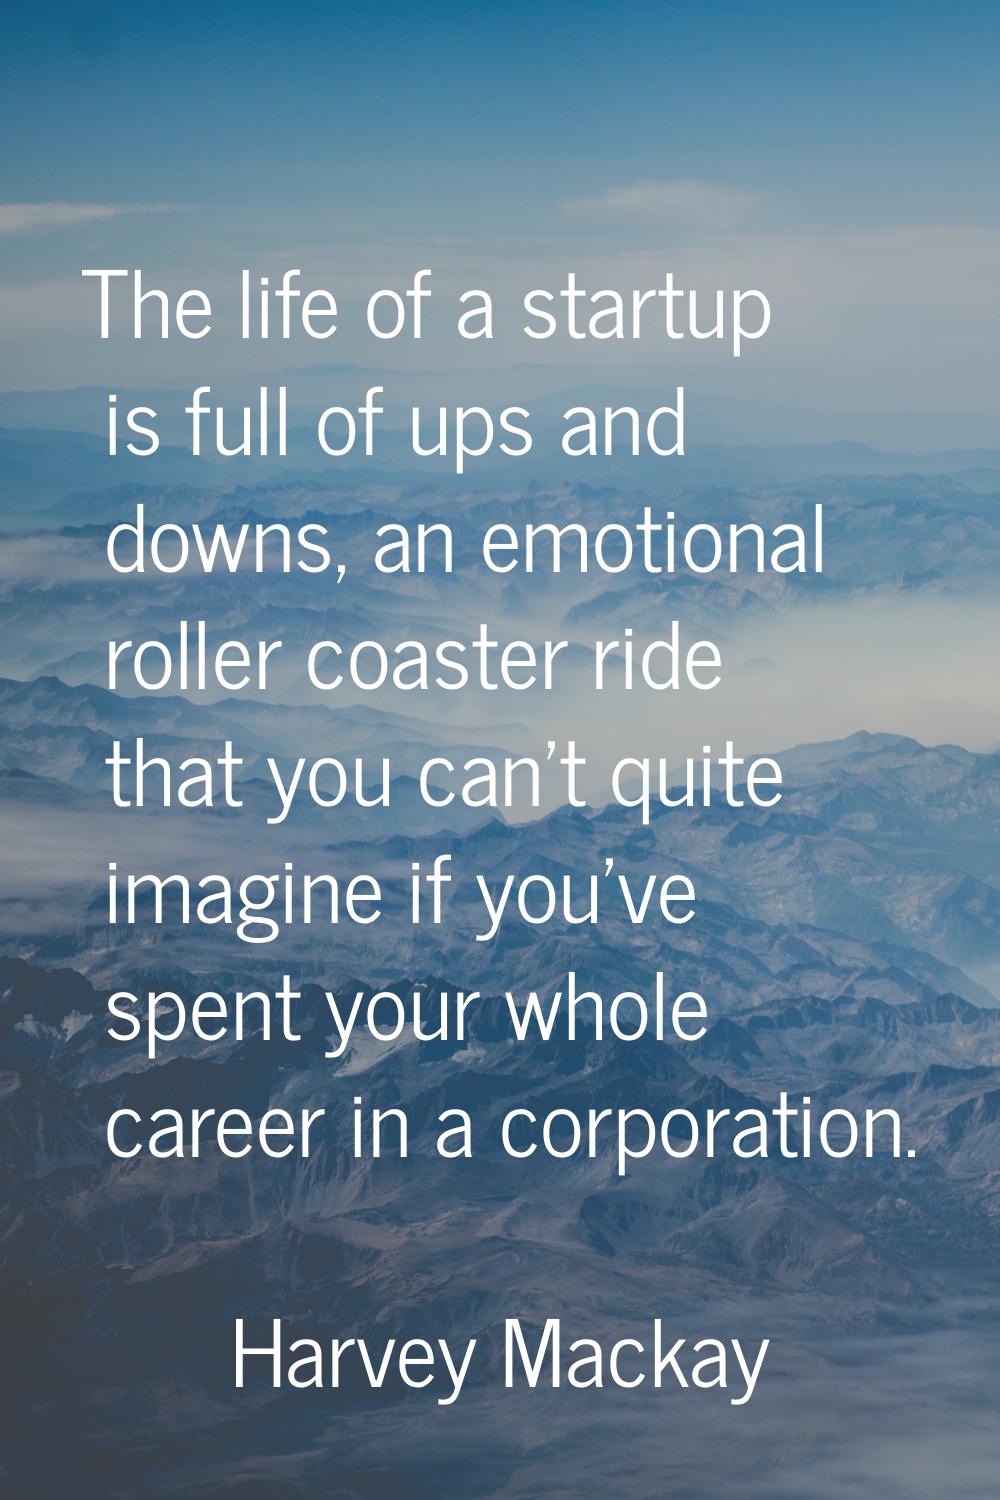 The life of a startup is full of ups and downs, an emotional roller coaster ride that you can't qui